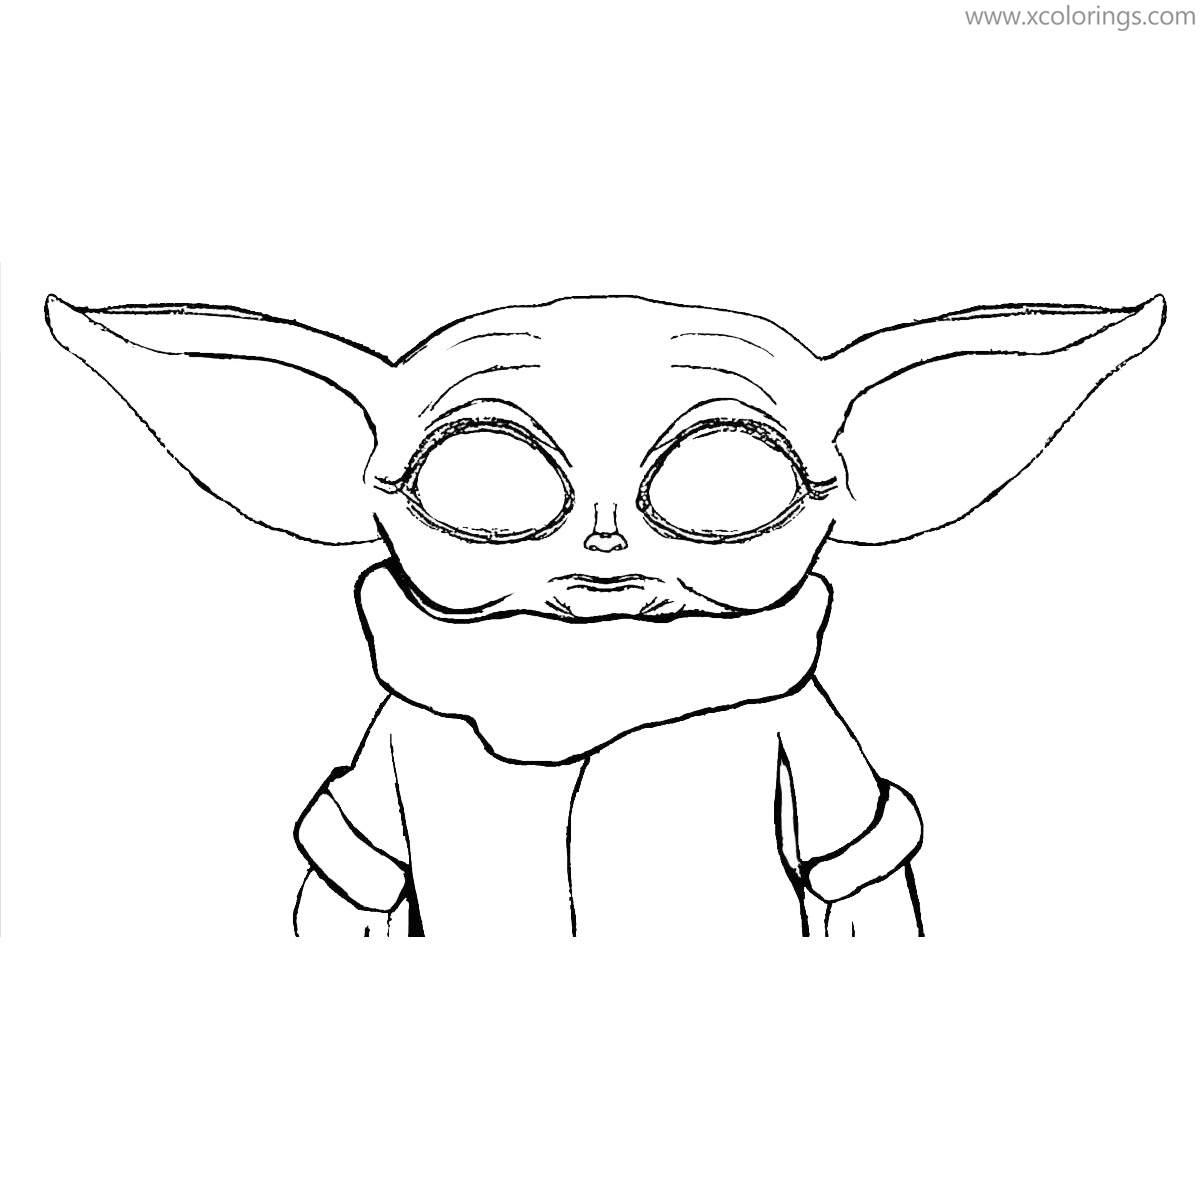 Free Baby Yoda Coloring Pages with Big Ears printable